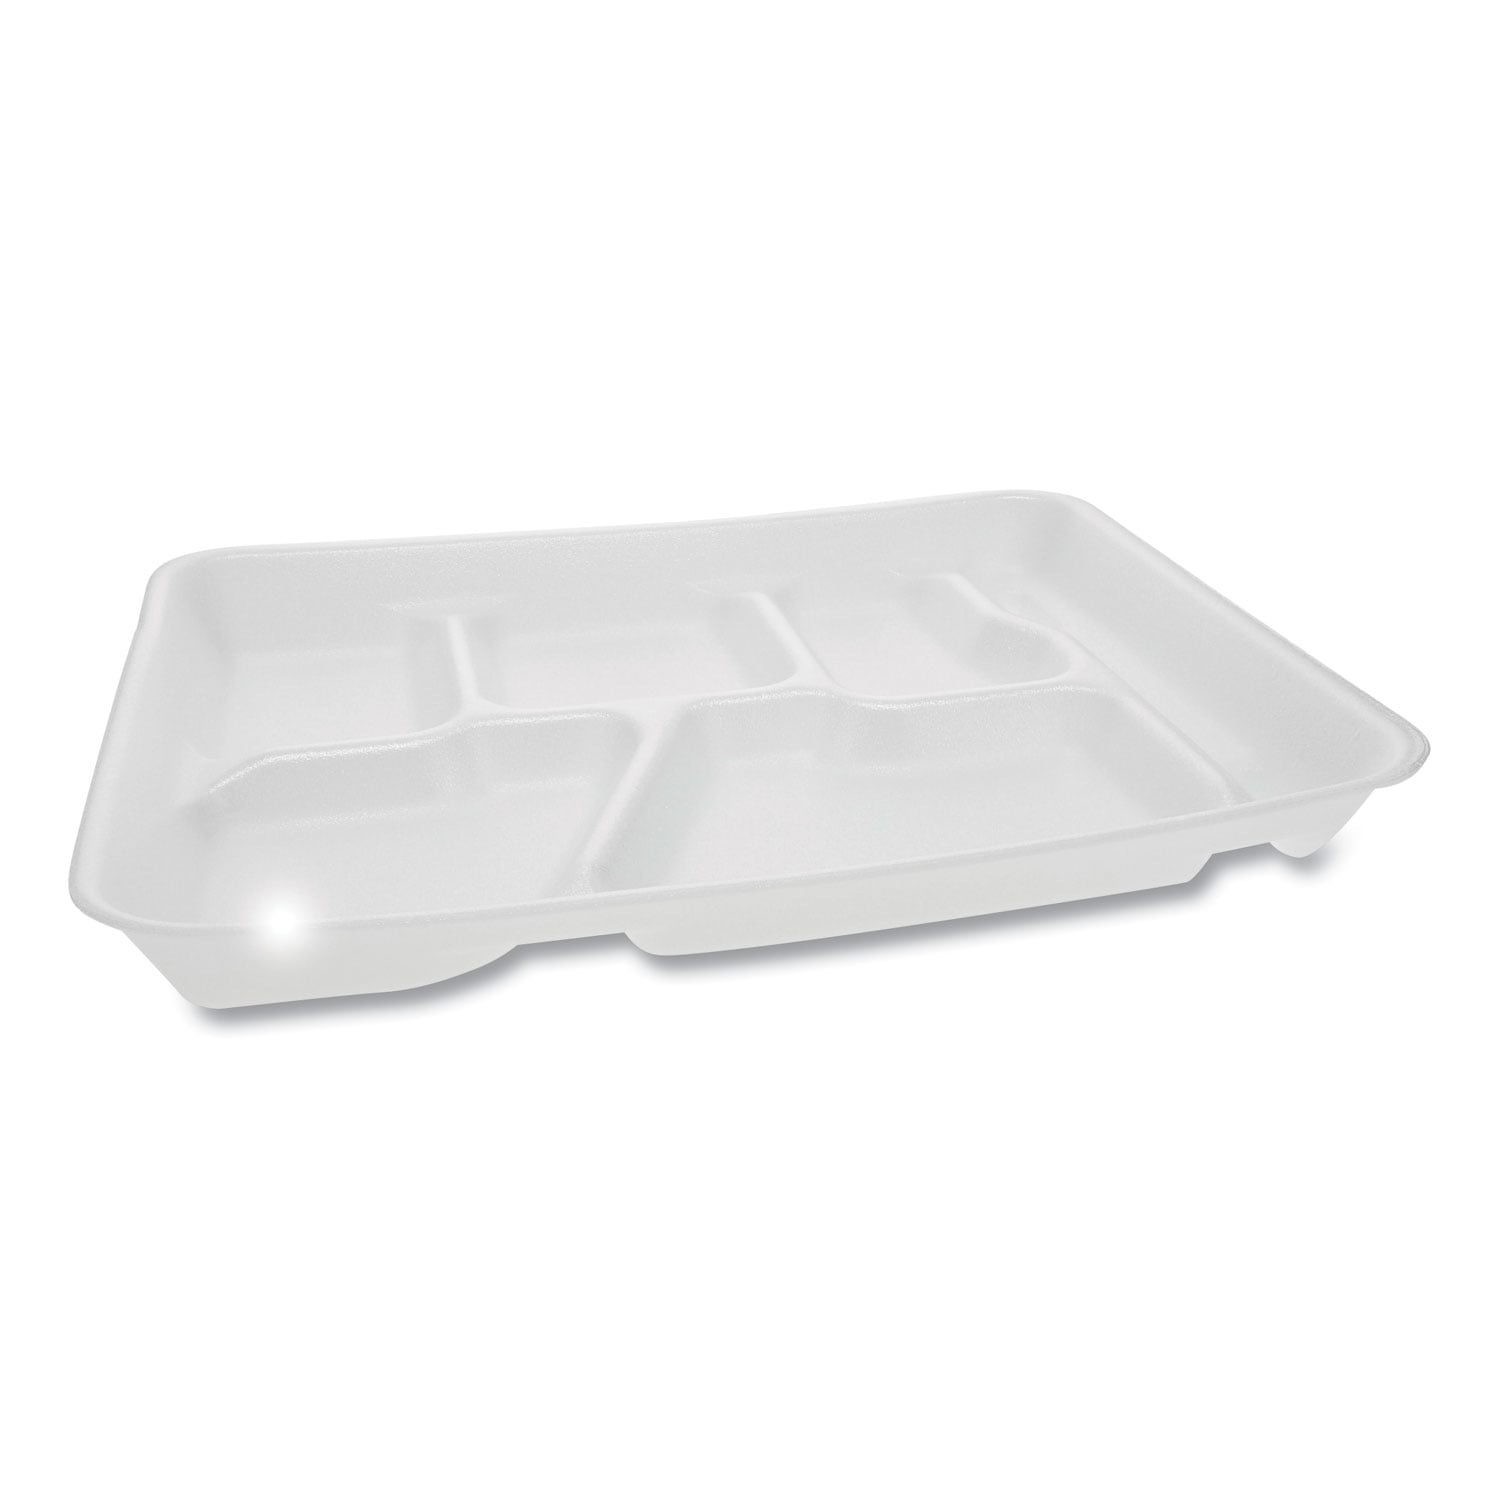 Pactiv YHLB0600 Pactiv Black Foam Food Containers Foam To Go Boxes ToGo  Containers PACTYHLB0600 Pactiv YHLB-0600 Take Out Containers Carry Out